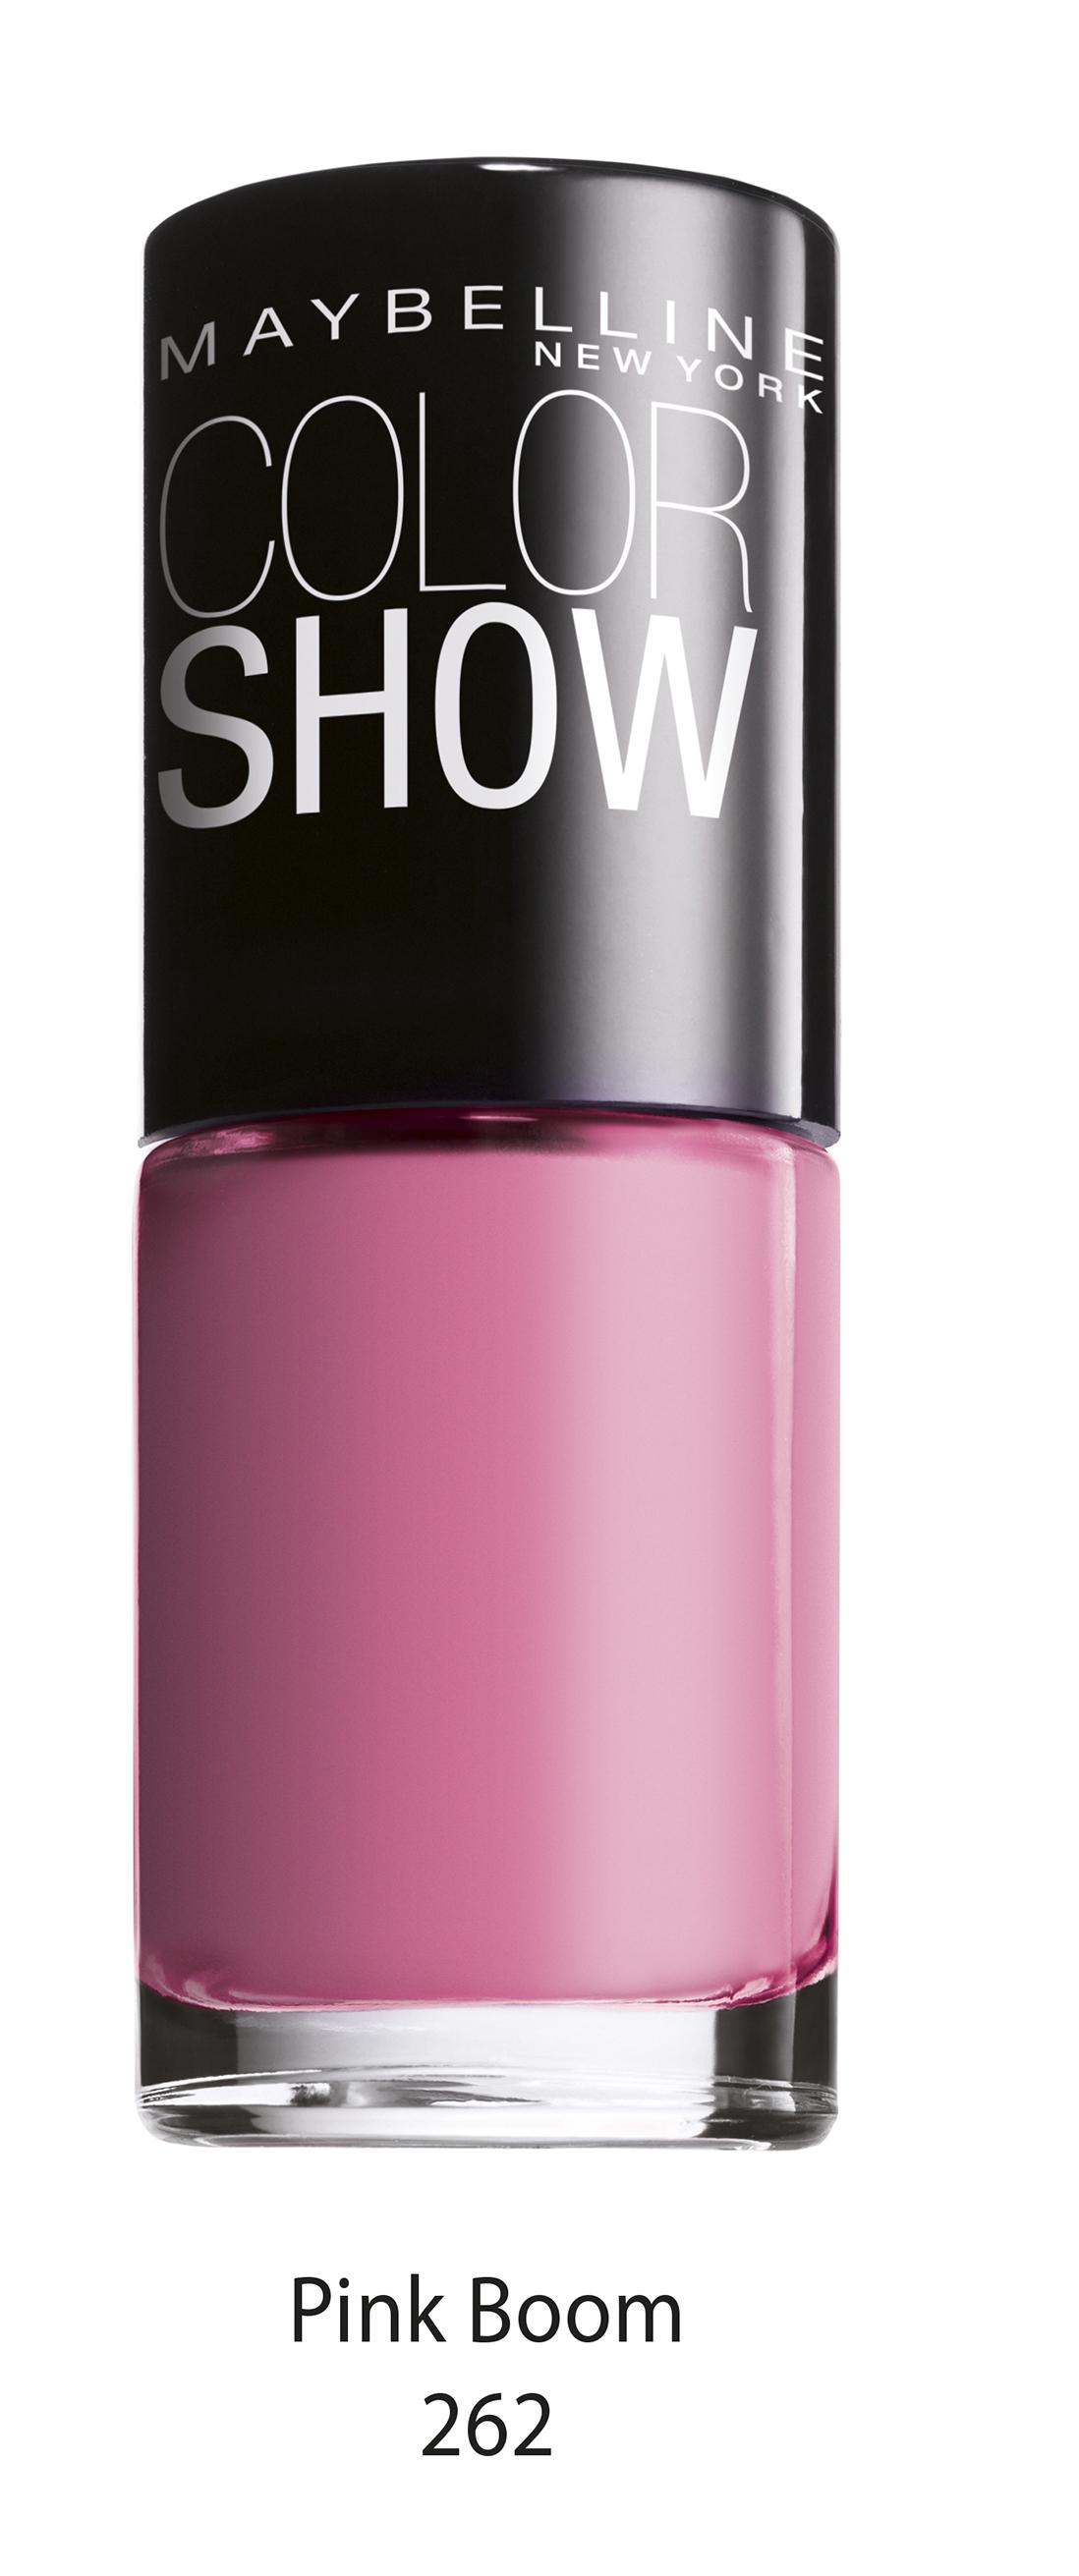 Maybelline Pink Boom - €3.99